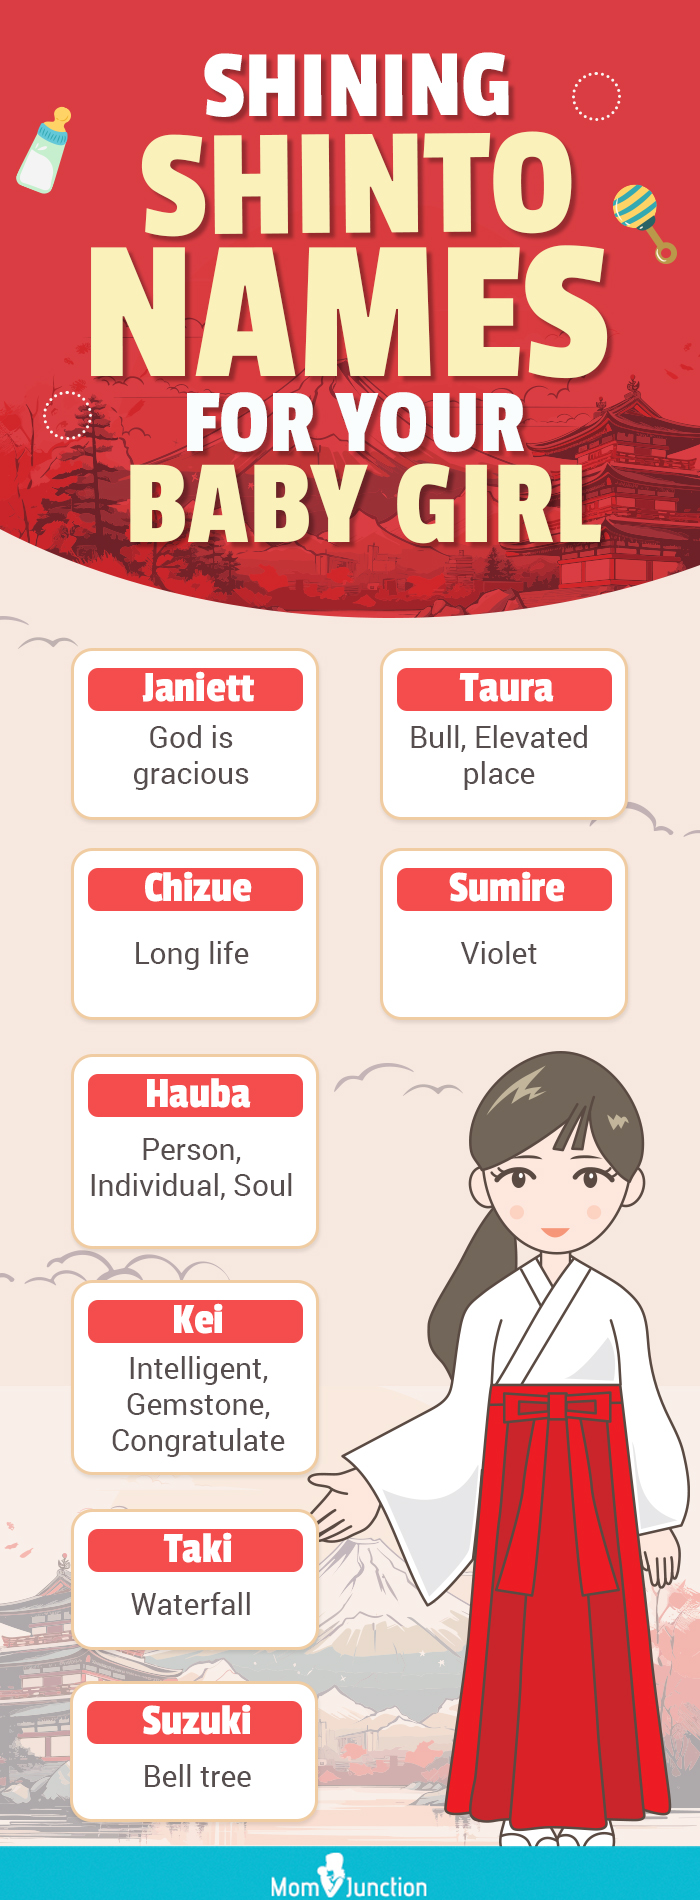 Shining Shinto Names For Your Baby Girl (infographic)